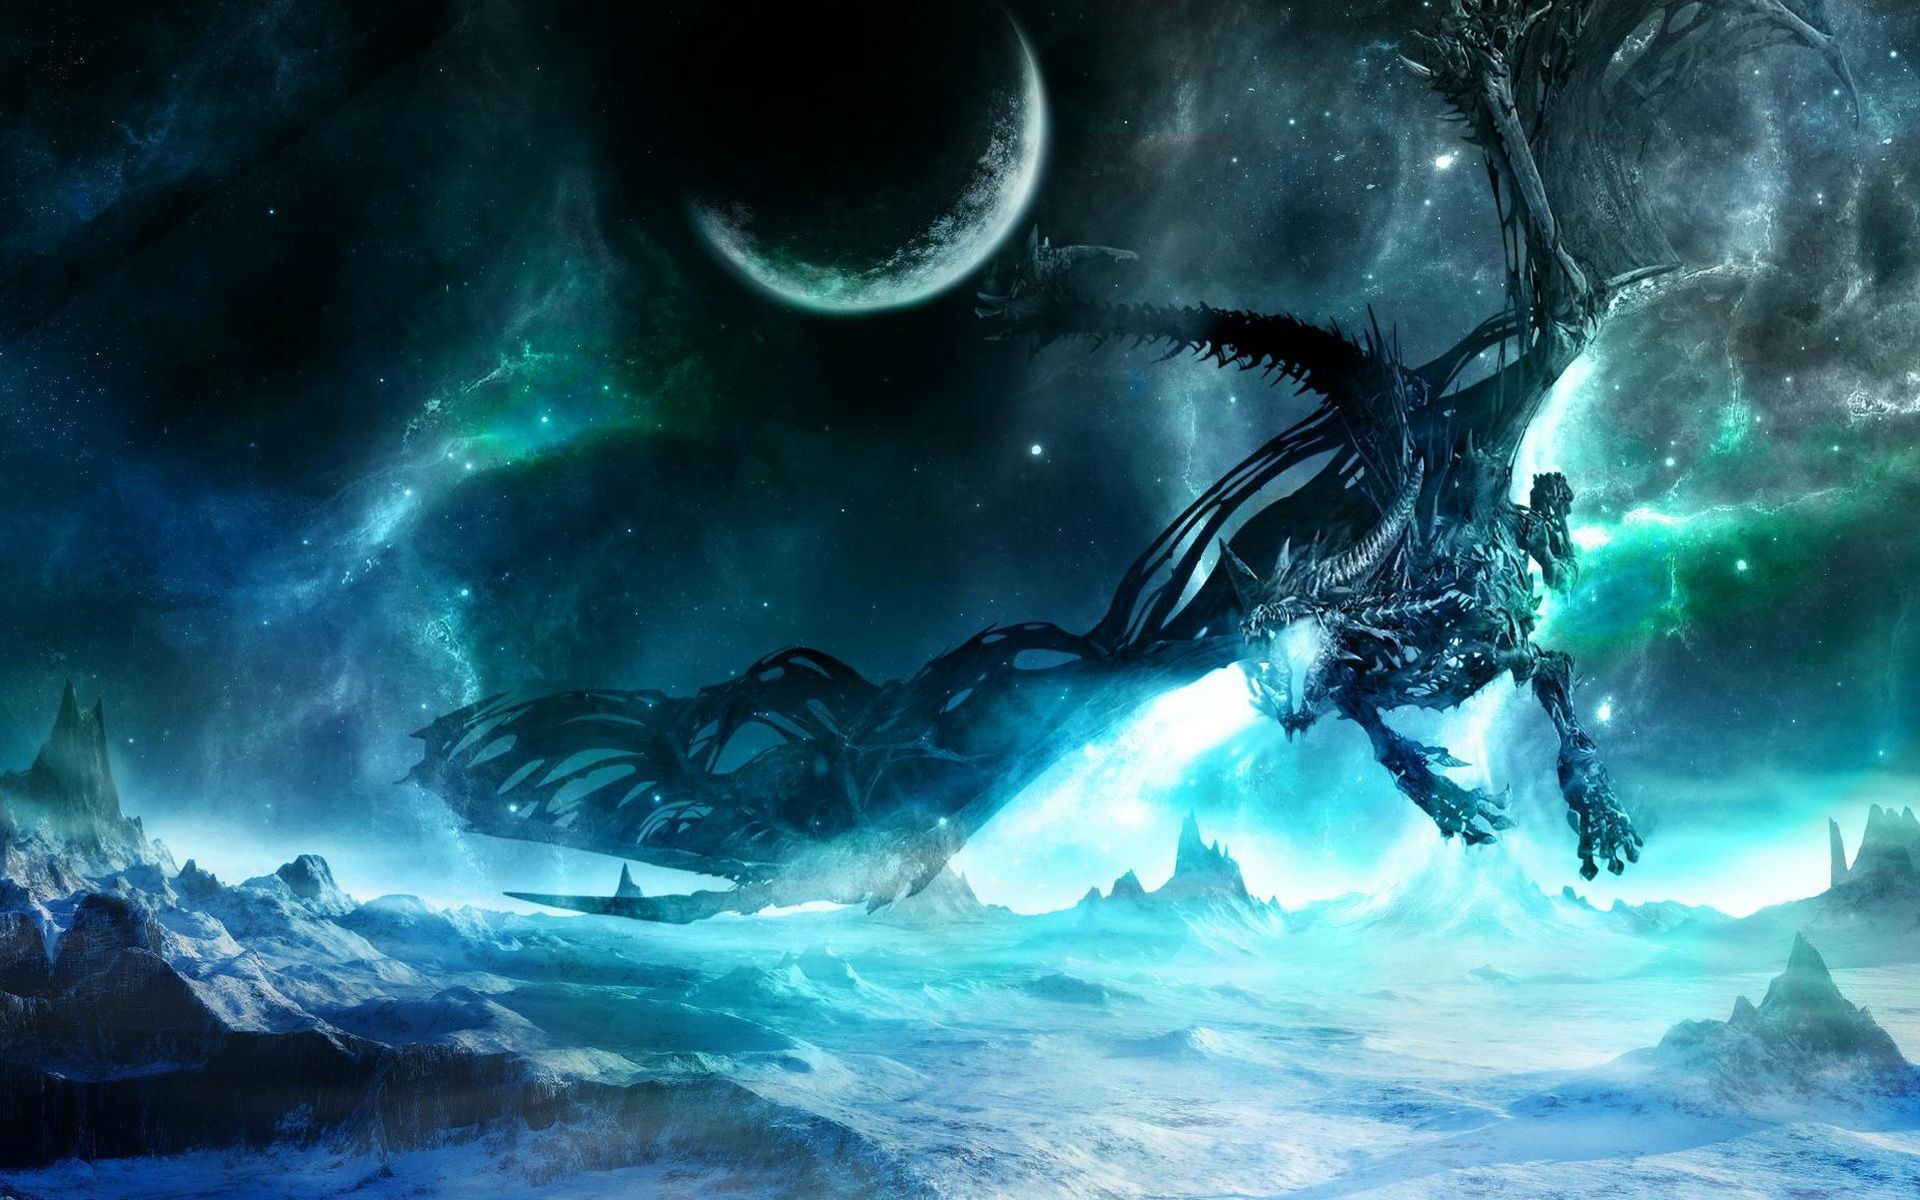 Black And Blue Dragon Wallpapers